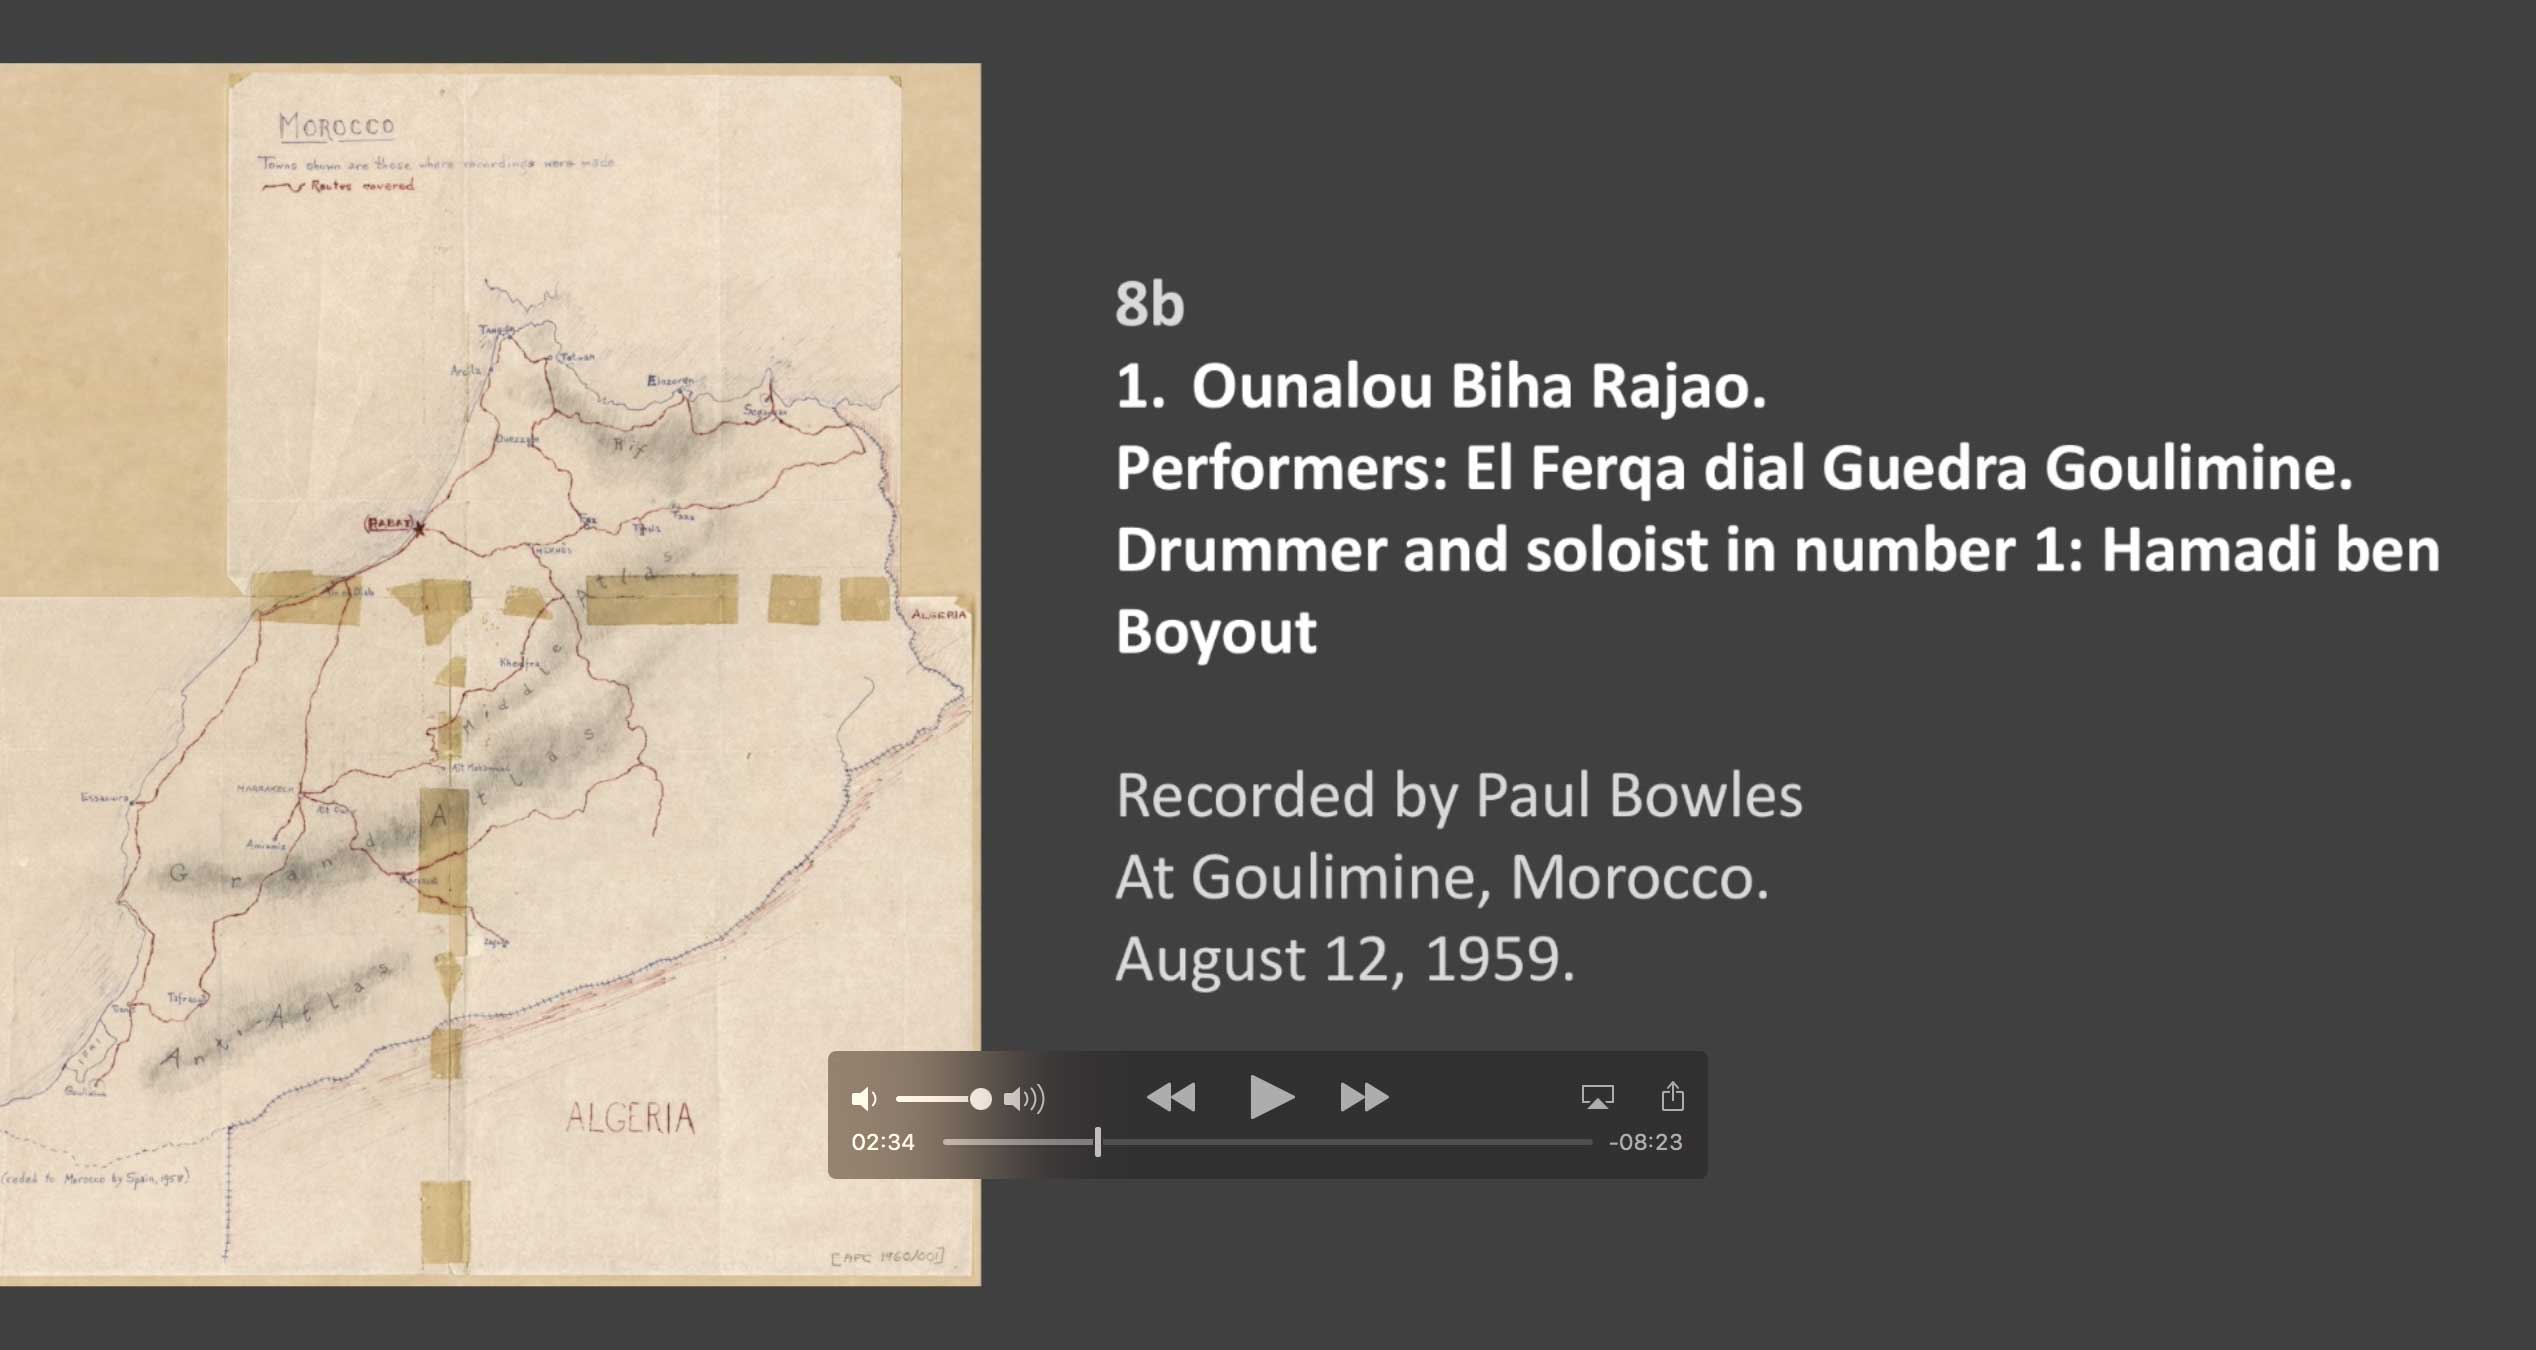 8B Track 1 Ounalou Biha Rajao.
Performers: El Ferqa dial Guedra Goulimine 
Drumming and solo singing are by Hamadi Ben Boyout.

Recorded by Paul Bowles at Goulimine, Moroccan Sahara.
August 12, 1959
